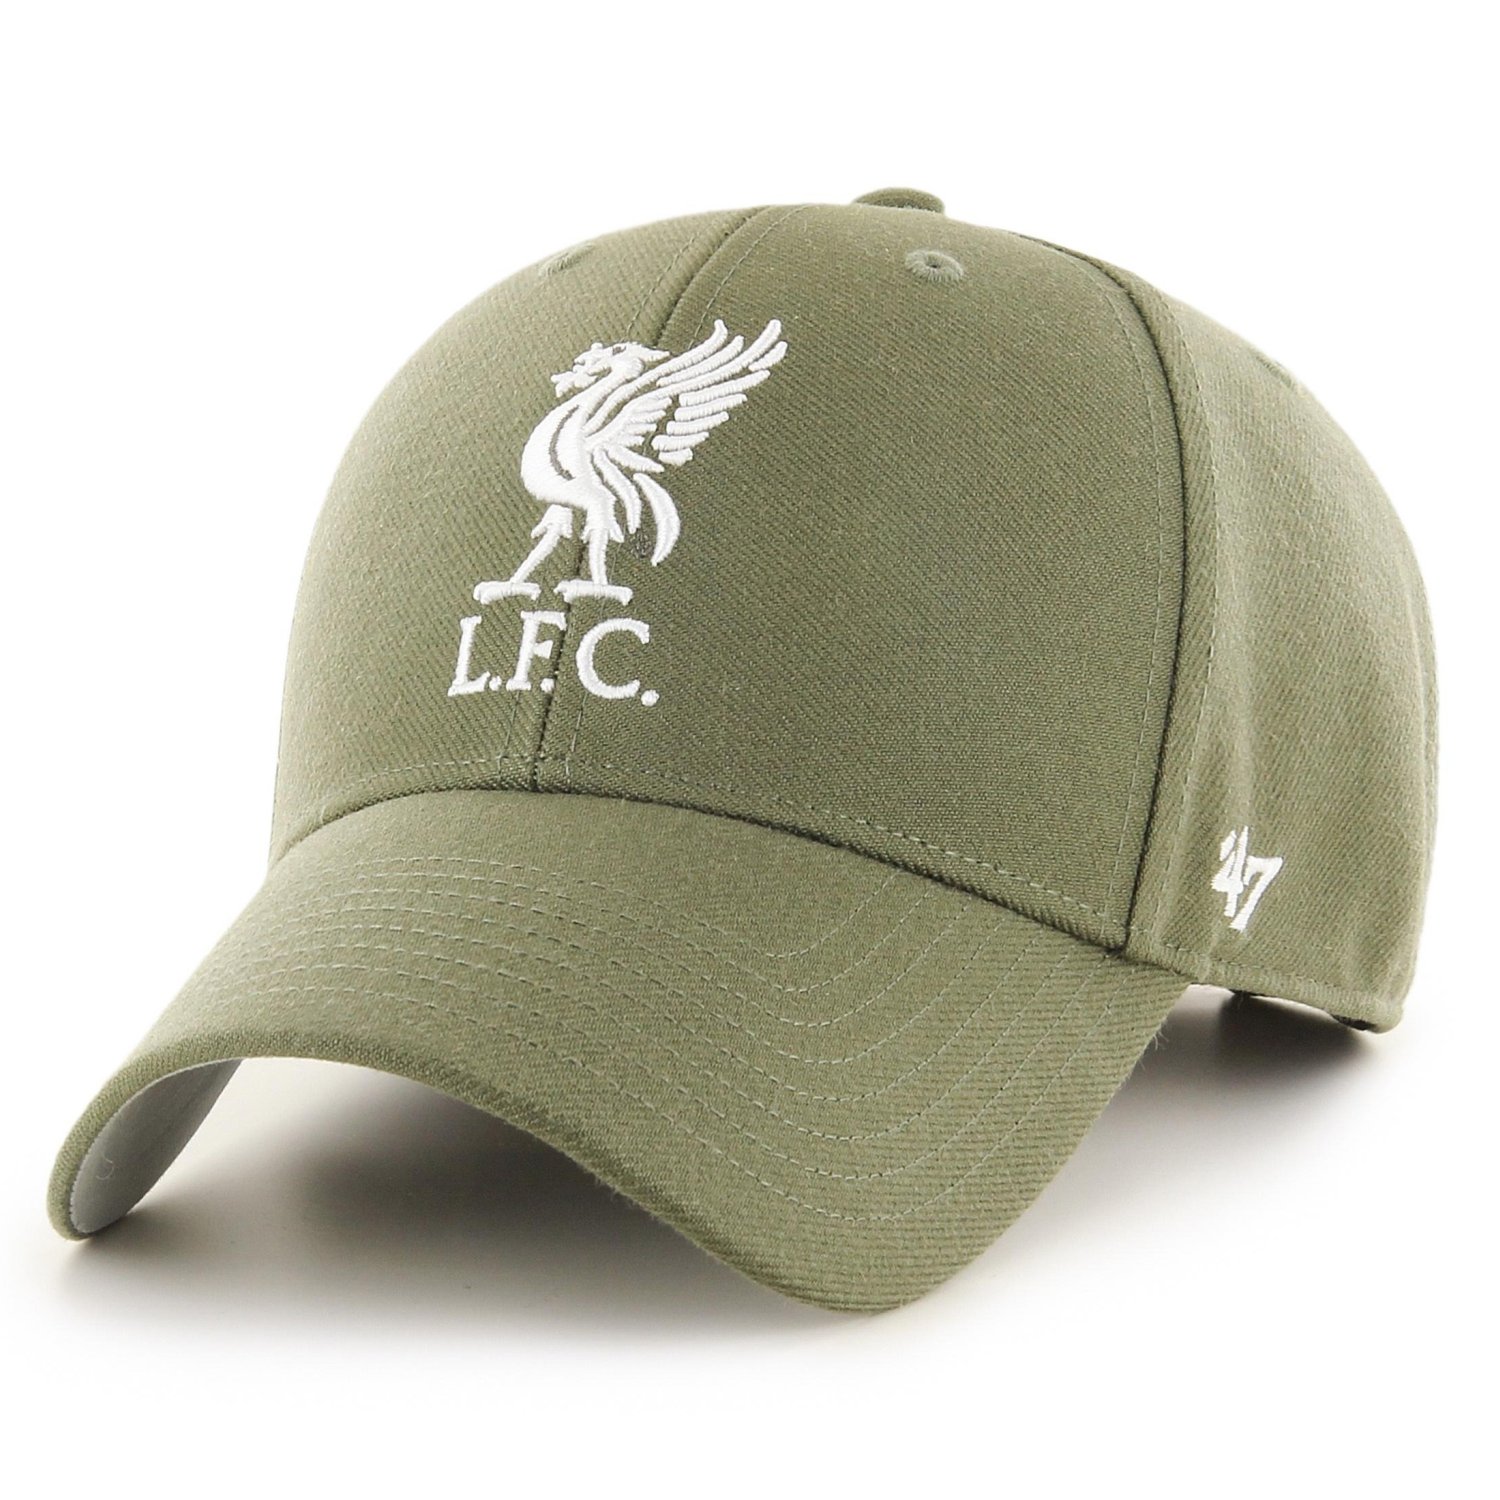 47 Brand Relaxed Fit Cap - FC Liverpool sandalwood oliv | Strapback ...